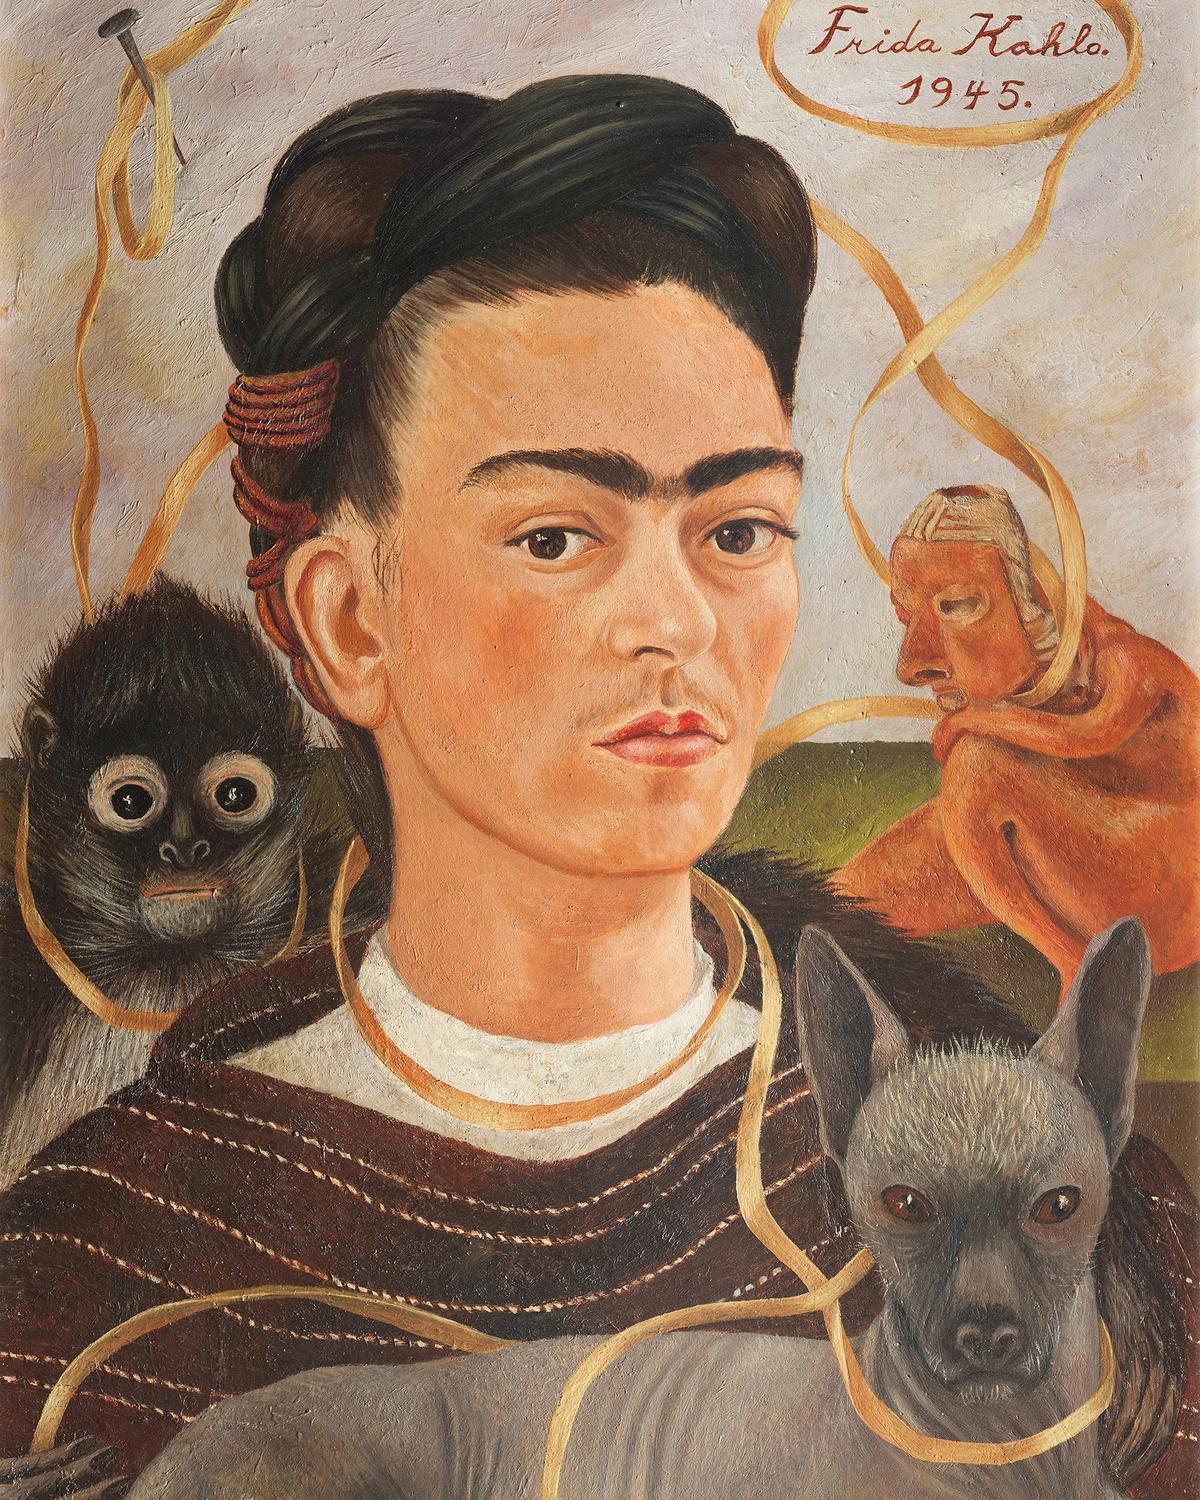 Frida Kahlo, Self-Portrait with Small Monkey (1945) Collection Museo Dolores Olmedo, Xochimilco, Mexico © 2020 Banco de México Diego Rivera Frida Kahlo Museums Trust, Mexico, D.F. / Artists Rights Society (ARS), New York